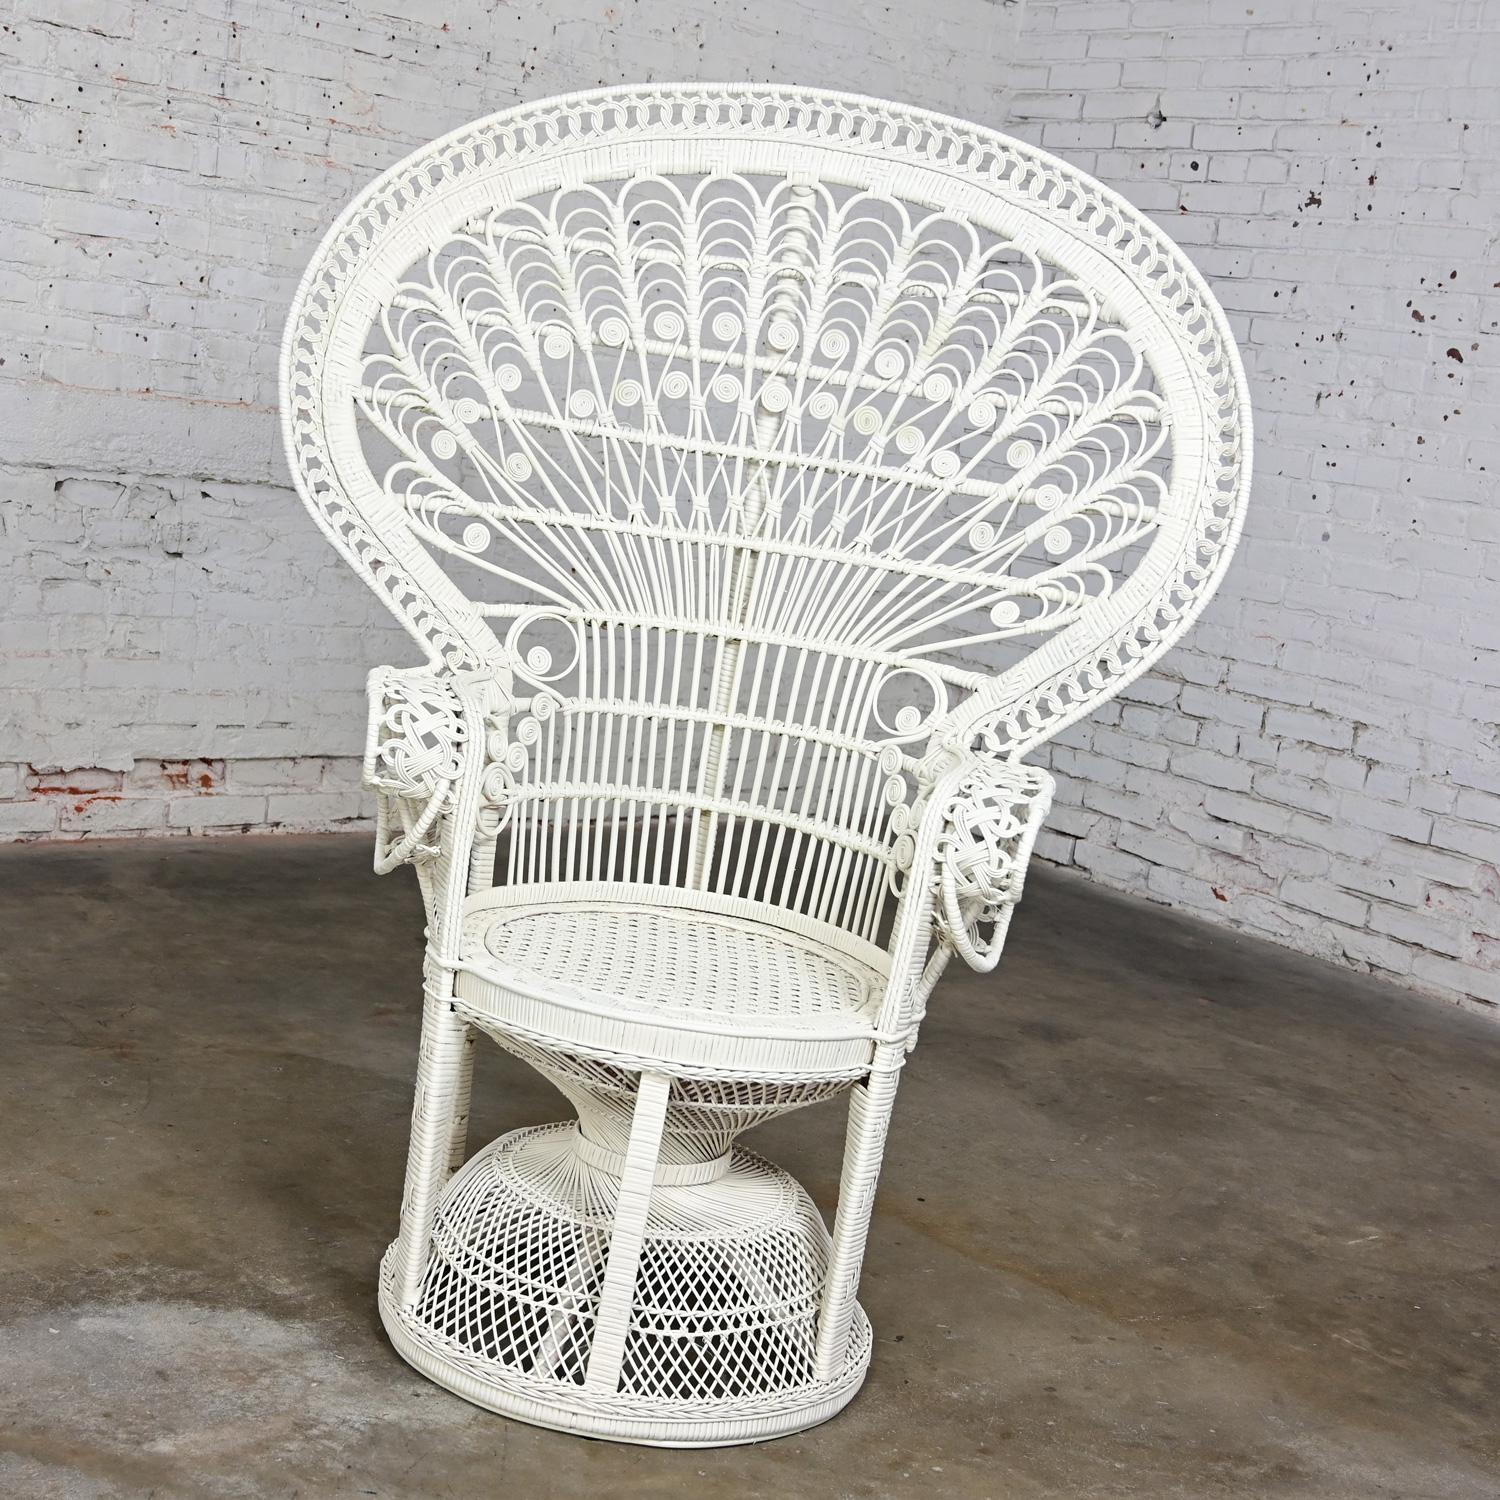 Stunning 1970s Bohemian Hollywood Regency off white painted rattan Peacock fan back chair. Beautiful condition, keeping in mind that this is vintage and not new so will have signs of use and wear even if it has been refinished or restored. We don’t